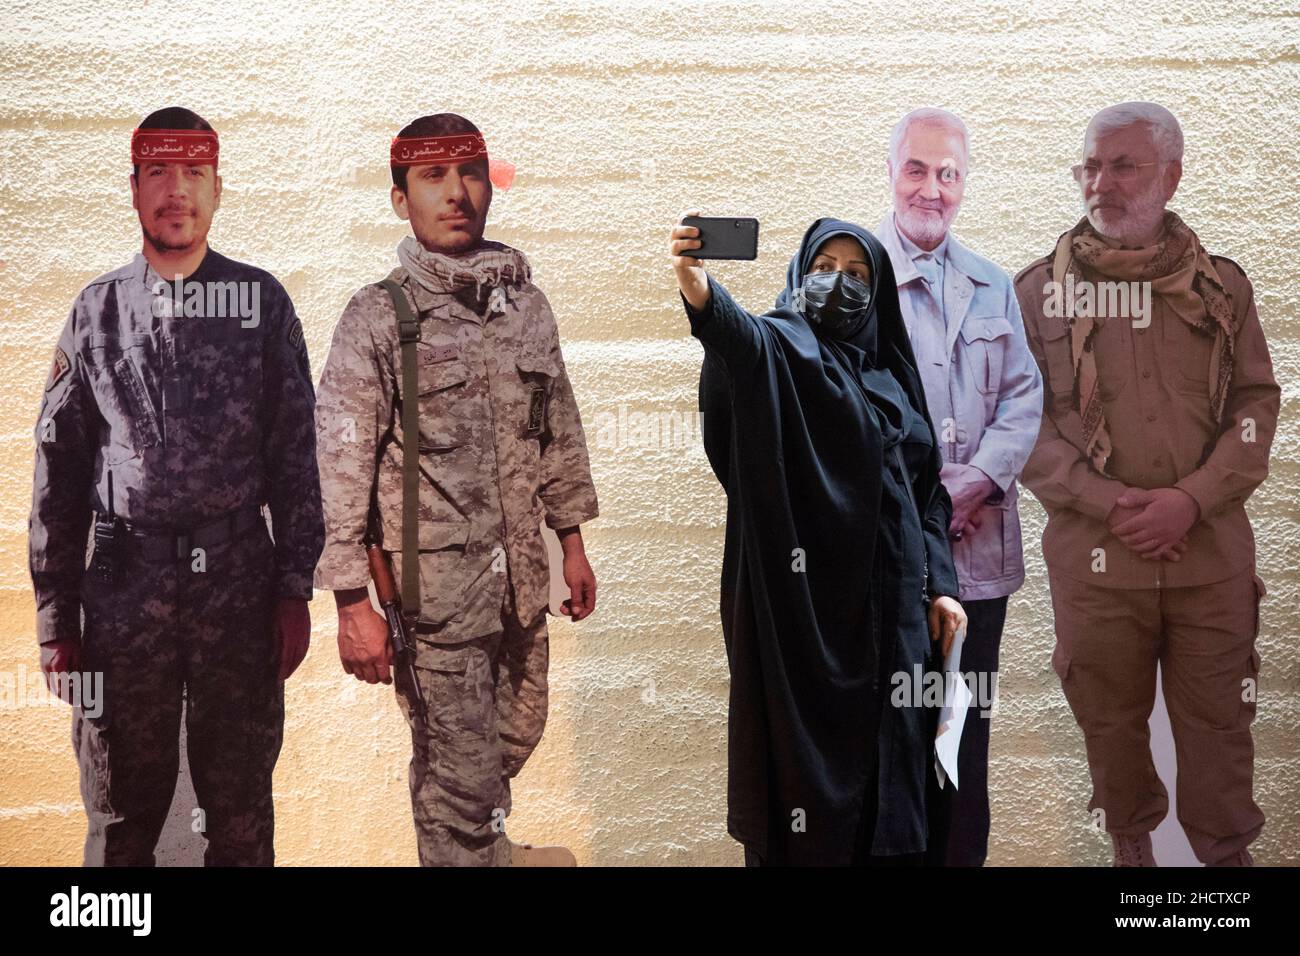 Tehran, Iran. 01st Jan, 2022. A woman taking a selfie with effigies of the Iranian former commander of the Islamic Revolutionary Guard Corps (IRGC) Quds Force, General Qasem Soleimani, and the Iraqi commander of the Popular Mobilisation Forces (PMF) Abu Mahdi al-Muhandis during the gathering of Qasem Soleimani's supporters. the Iranian former Islamic Revolutionary Guard Corps (IRGC) Quds Force General Qasem Soleimani was killed in an American drone attack in Baghdad airport. (Photo by Sobhan Farajvan/Pacific Press) Credit: Pacific Press Media Production Corp./Alamy Live News Stock Photo